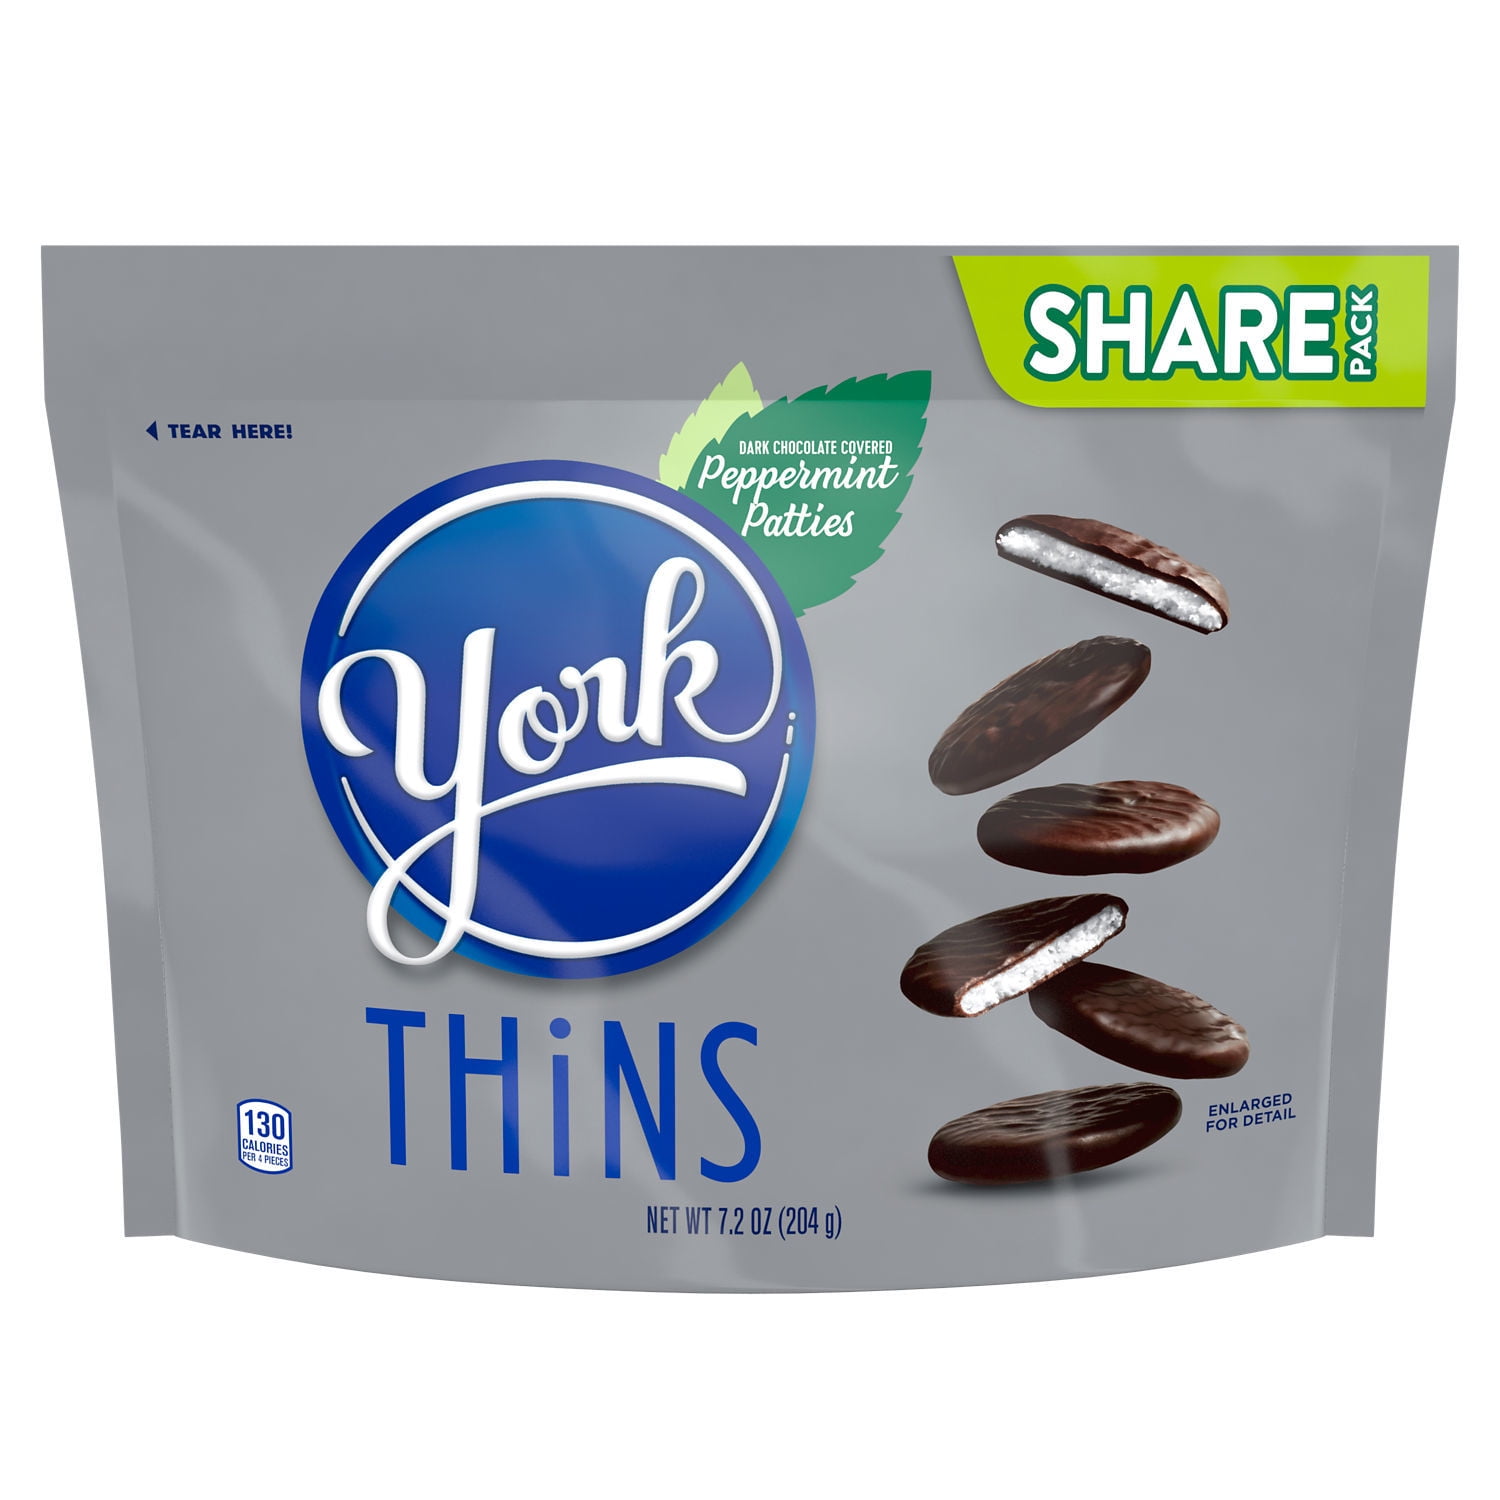 YORK THiNS Dark Chocolate Individually Wrapped, Gluten Free Peppermint Patties Candy Share Pack, 7.2 oz